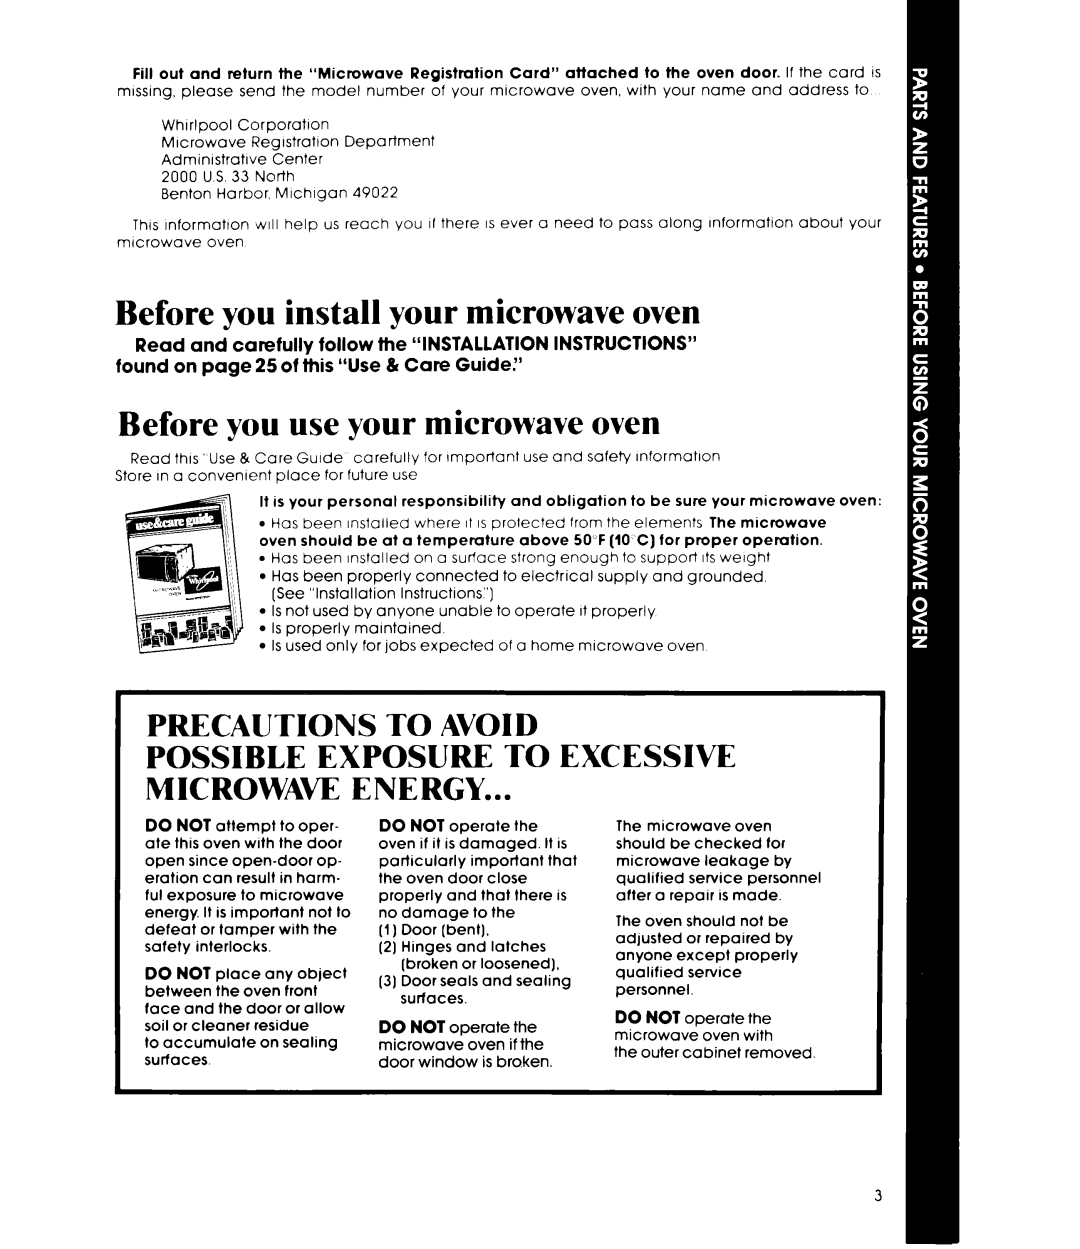 Whirlpool MW8700XR manual Before you install your microwave oven, Before you use your microwave oven, Precautions To Avoid 